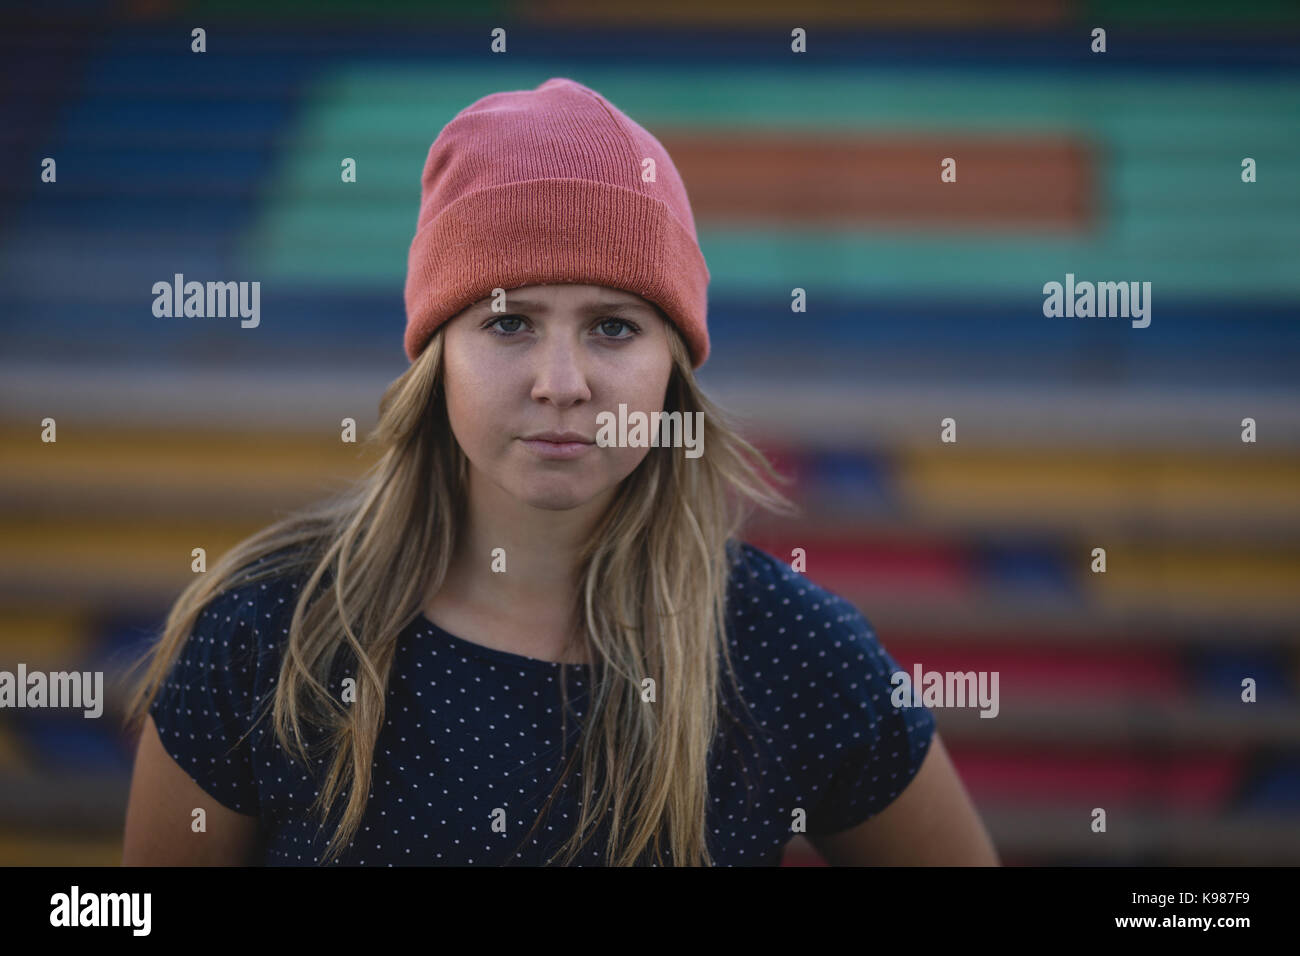 Portrait of young woman wearing knit hat Stock Photo